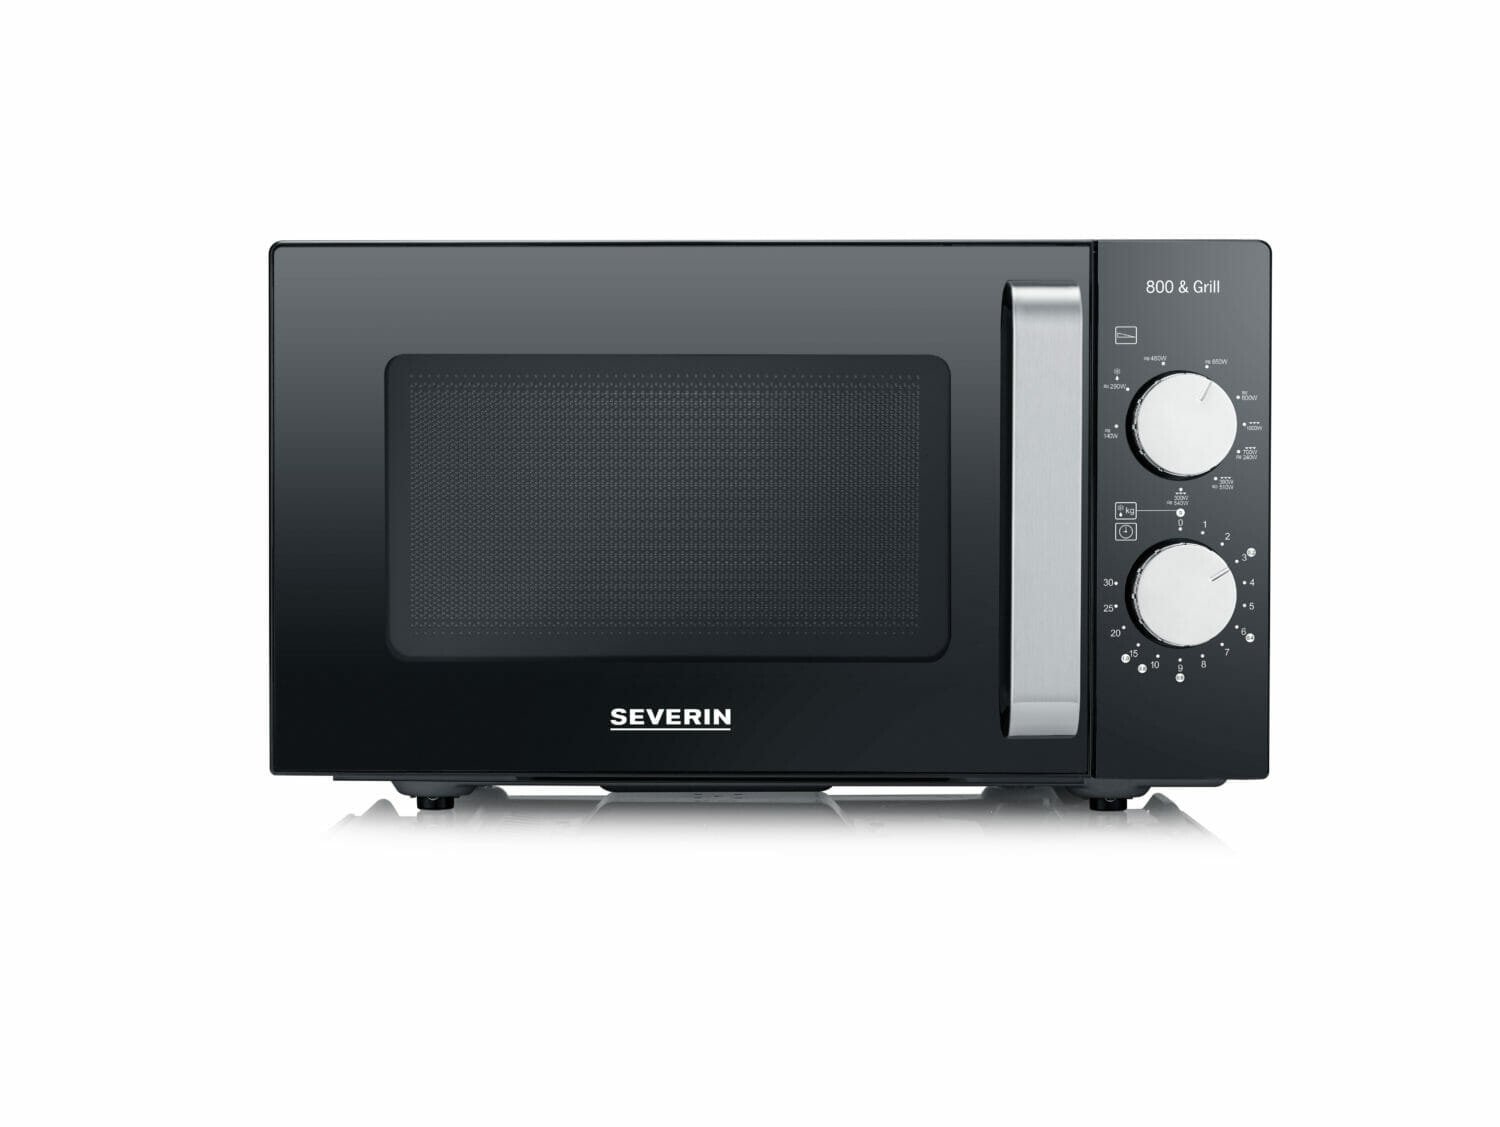 SEVERIN MW 7762 - Countertop - Grill microwave - 20 L - 800 W - Rotary - Black - Stainless steel